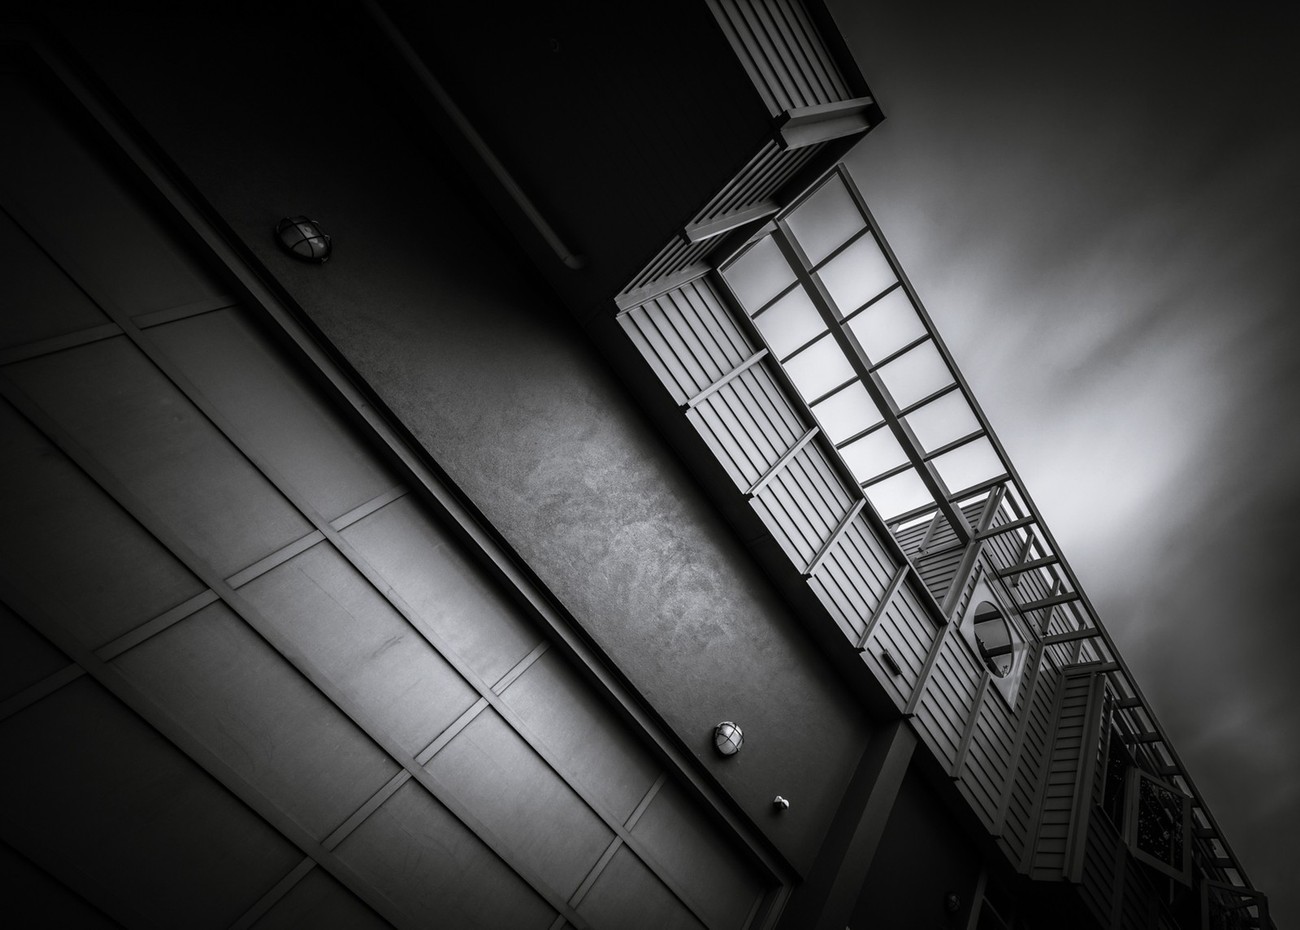 Abstract Architecture Photo Contest Winner